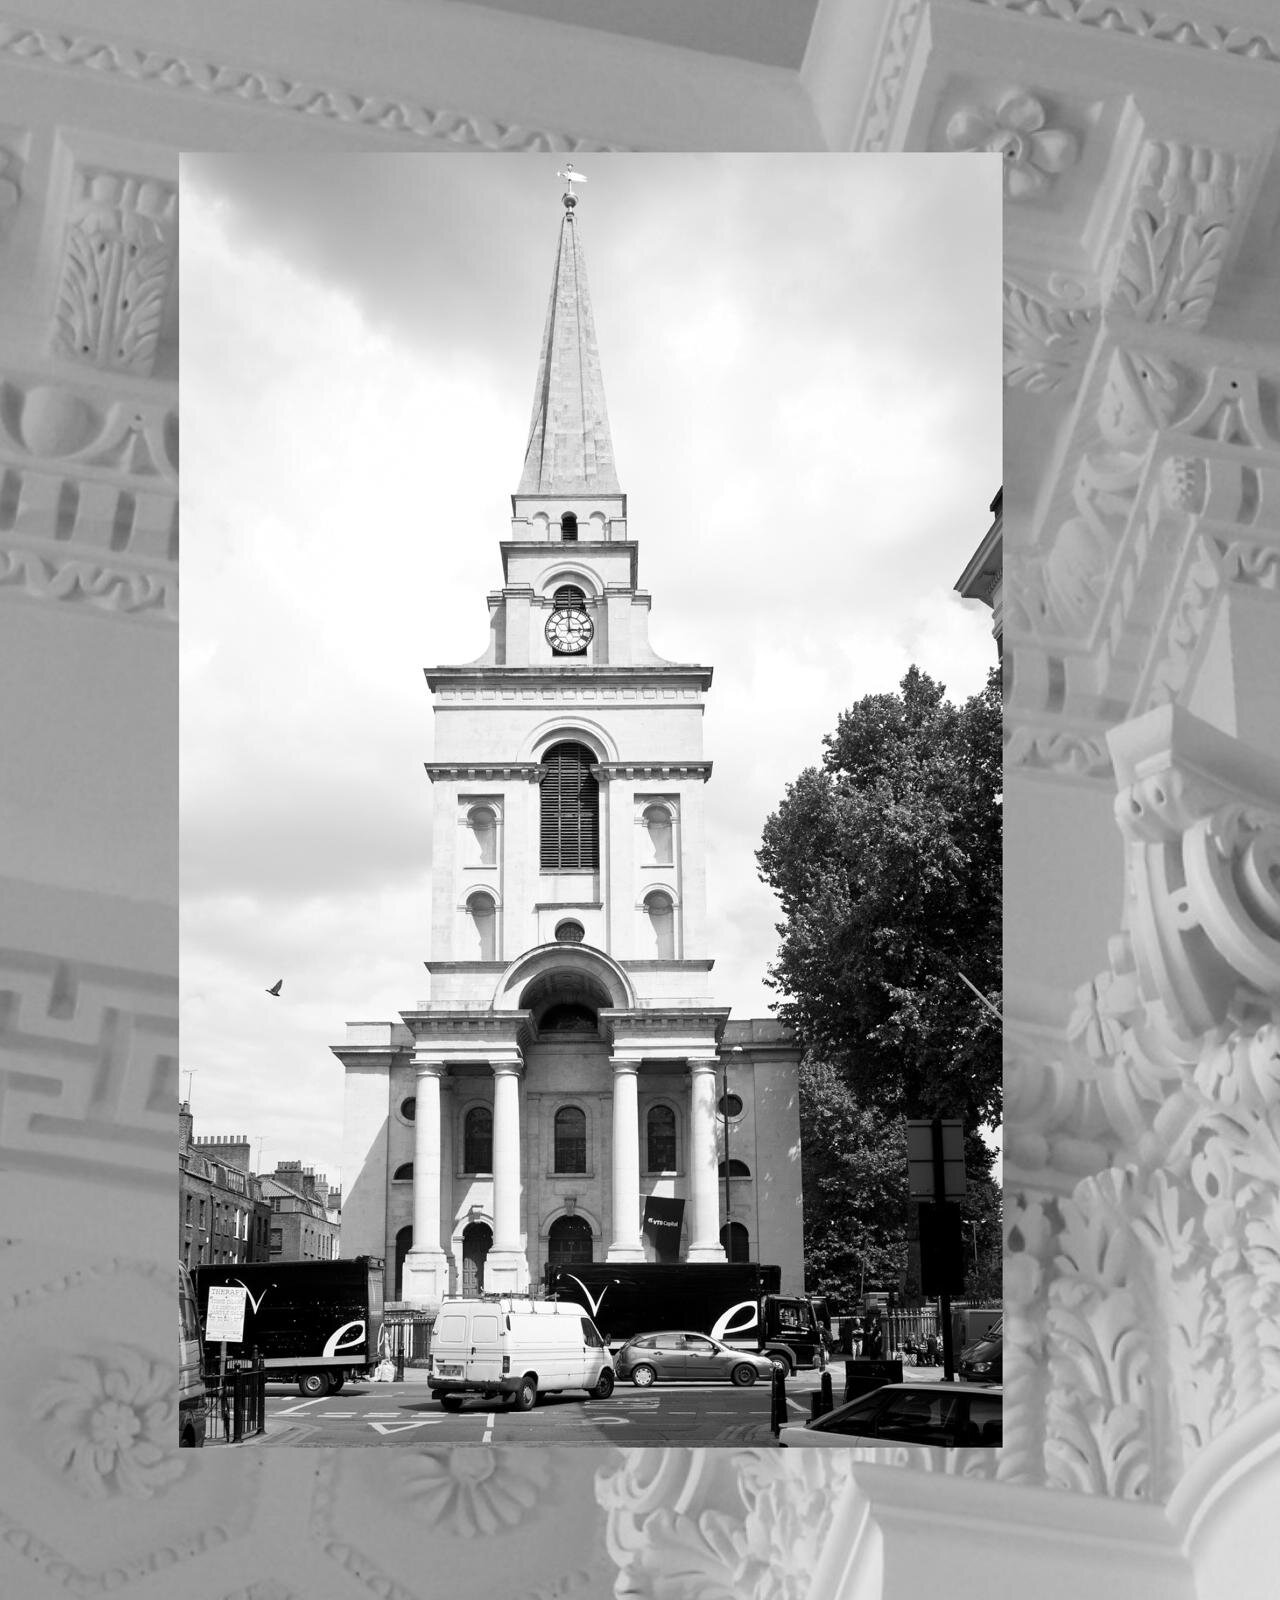 Step into an iconic East End landmark venue. ✨

Designed by renowned architect Nicholas Hawksmoor, completed in 1729, and recently restored, Christ Church Spitalfields seamlessly blends historic grandeur with modern detailing. 

A magnificently resto